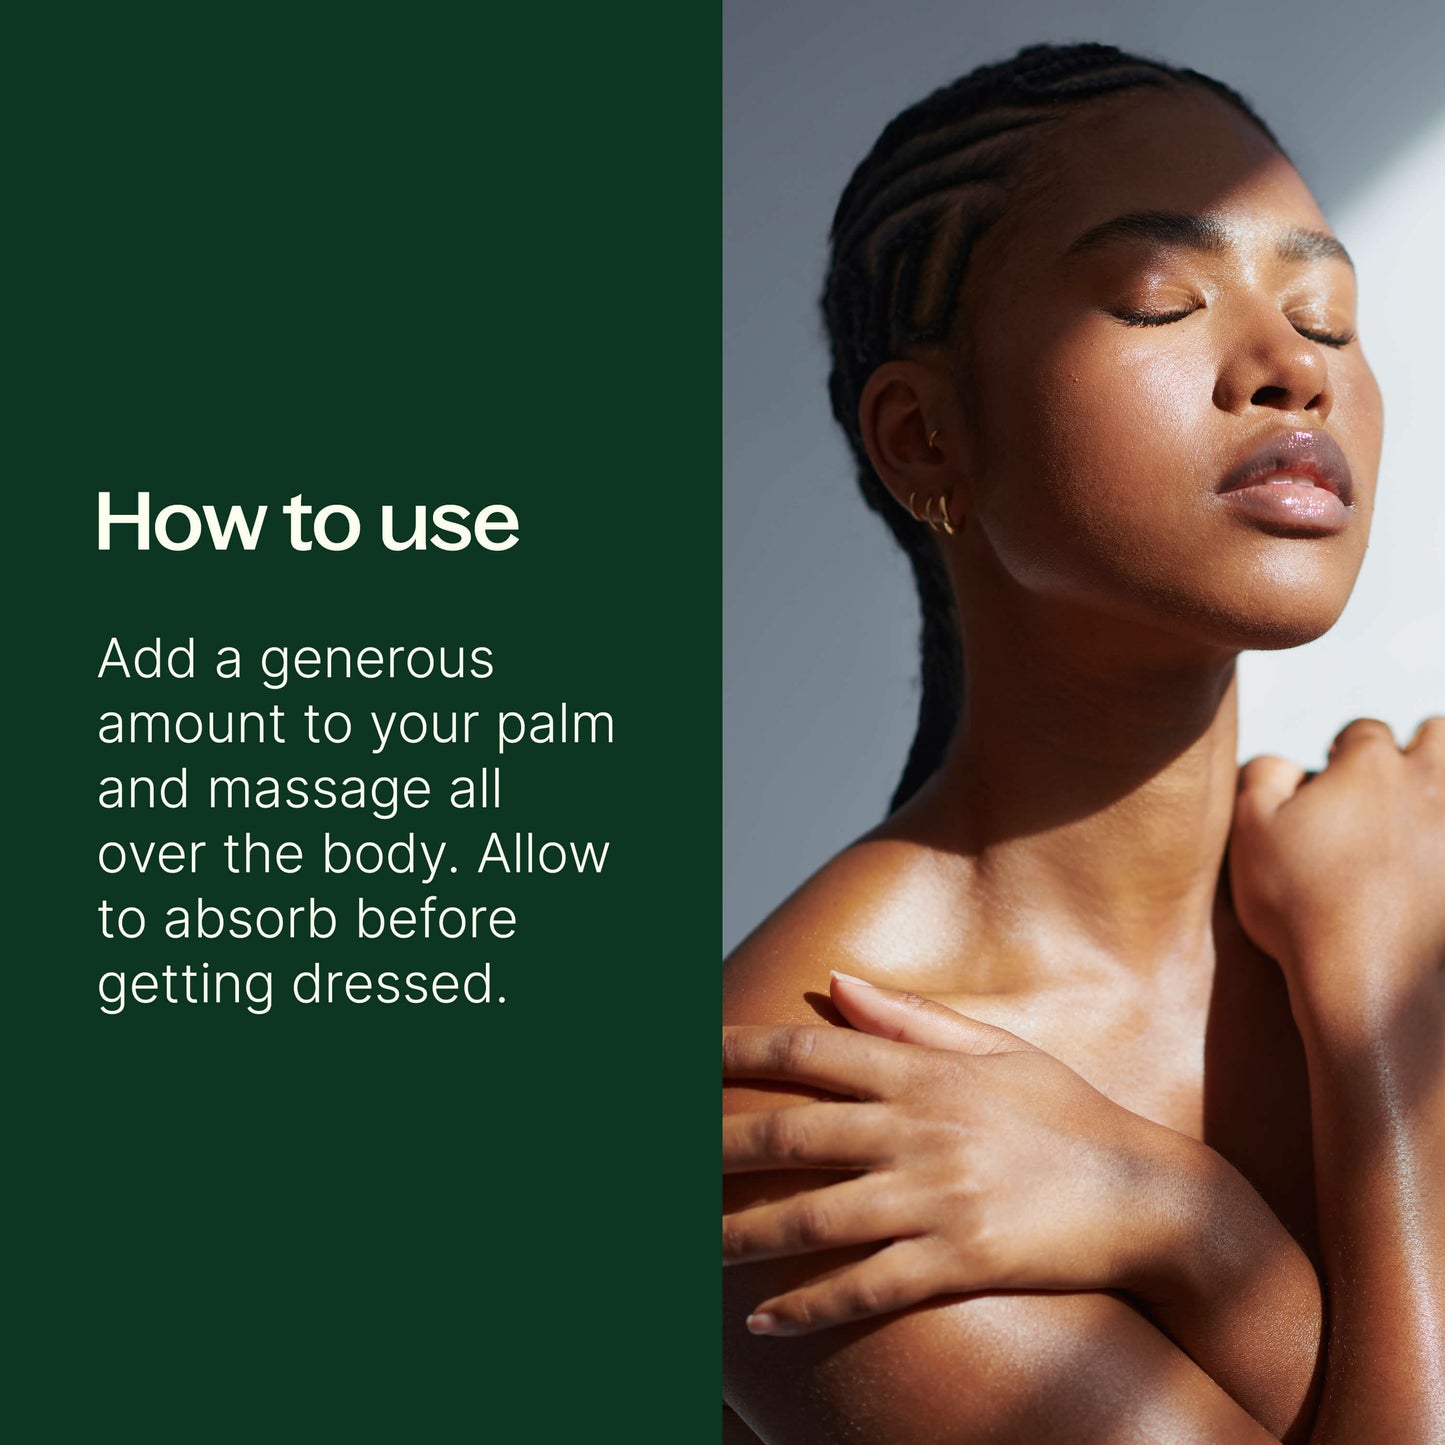 How To Use: Add a generous amount to your palm and massage all over the body. Allow to absorb before getting dressed